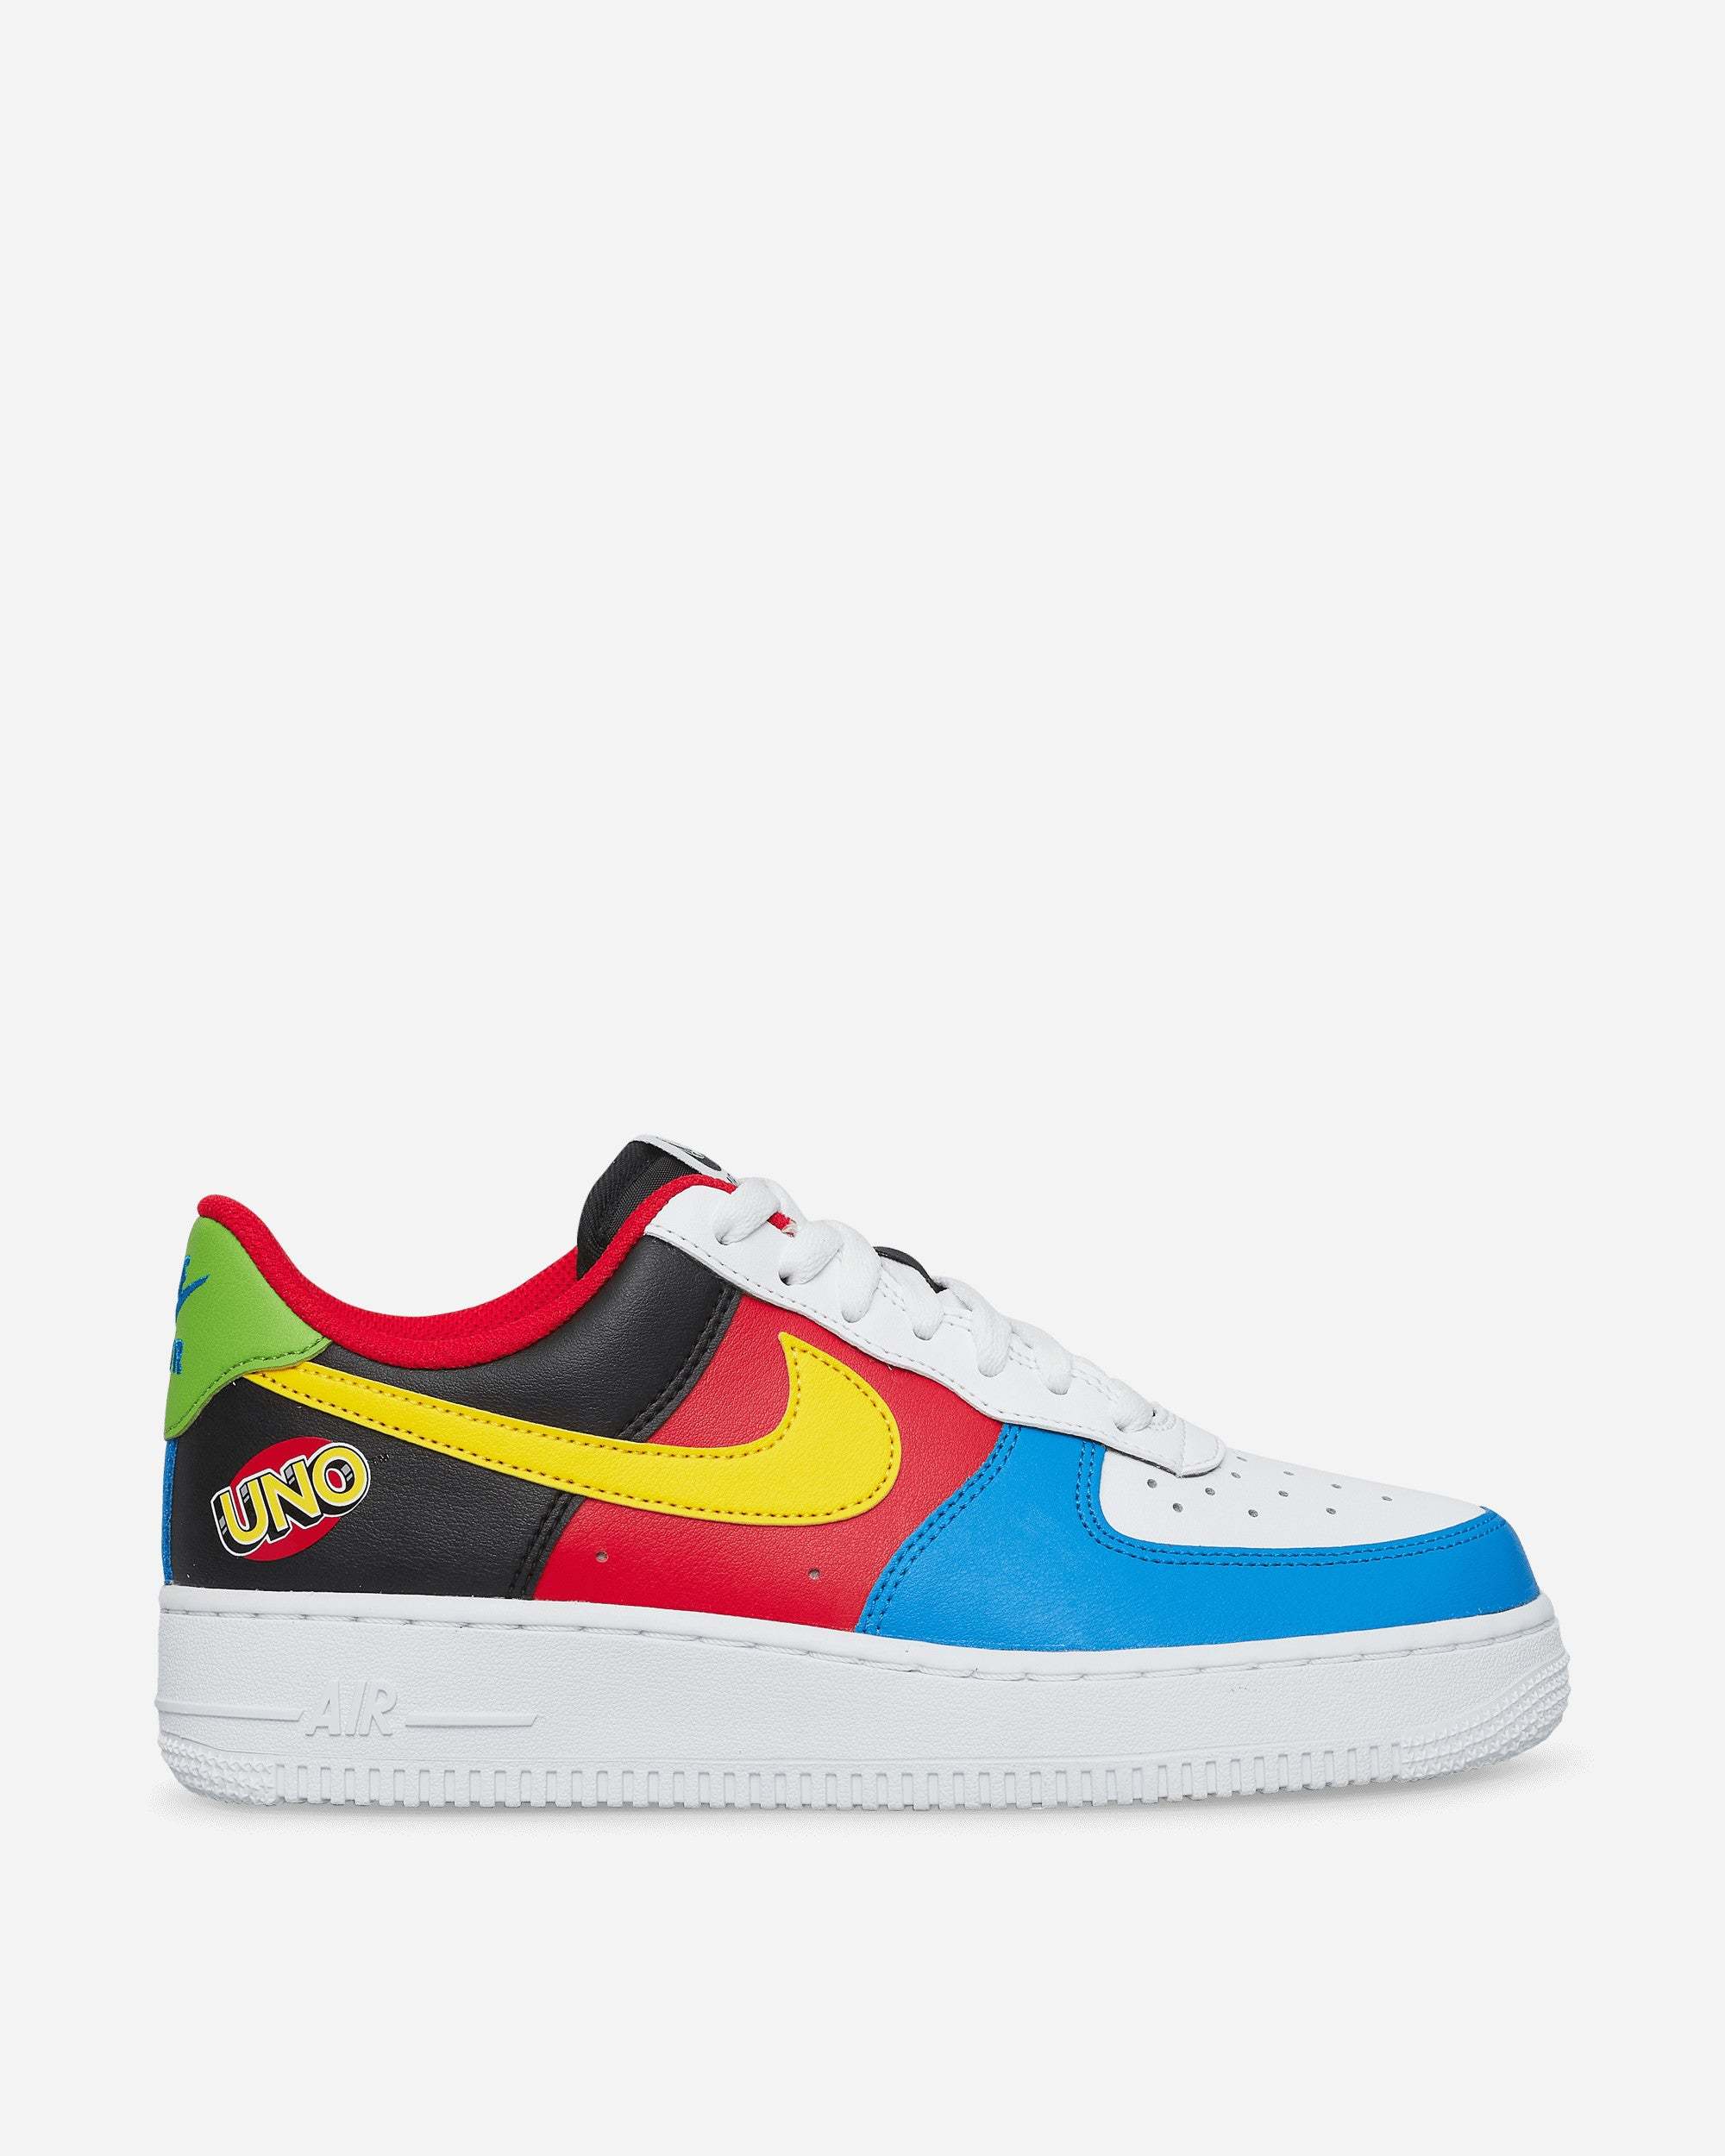 Air Force 1 '07 Qs 'uno' Sneakers Nike Special Project